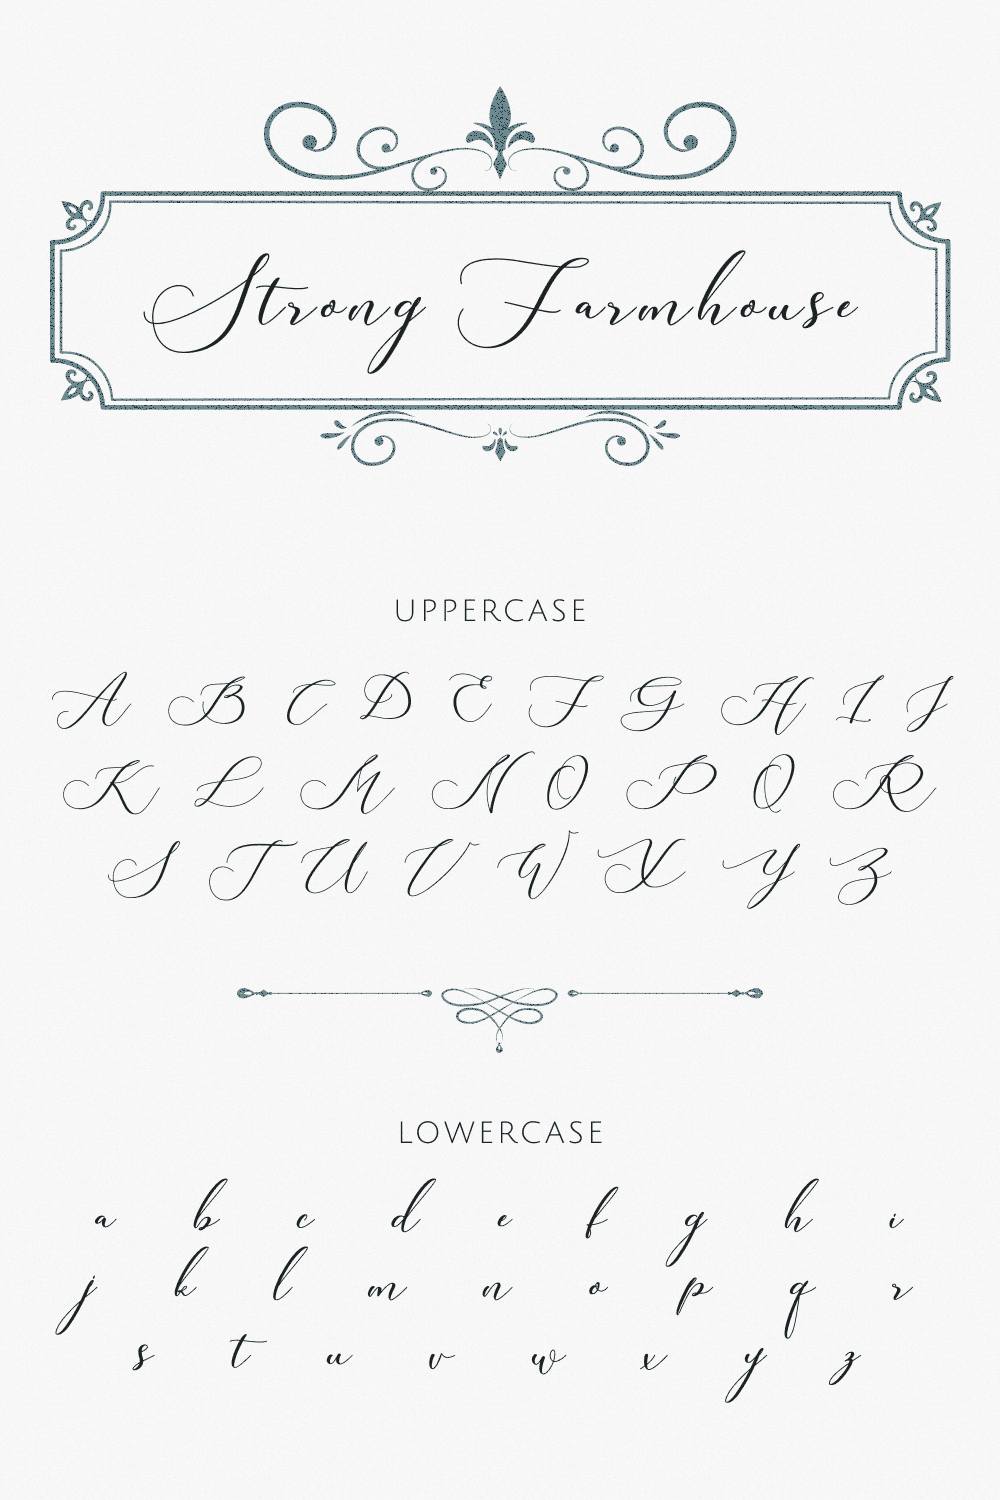 Strong farmhouse free font MasterBundles uppercase and lowercase preview for Pinterest.